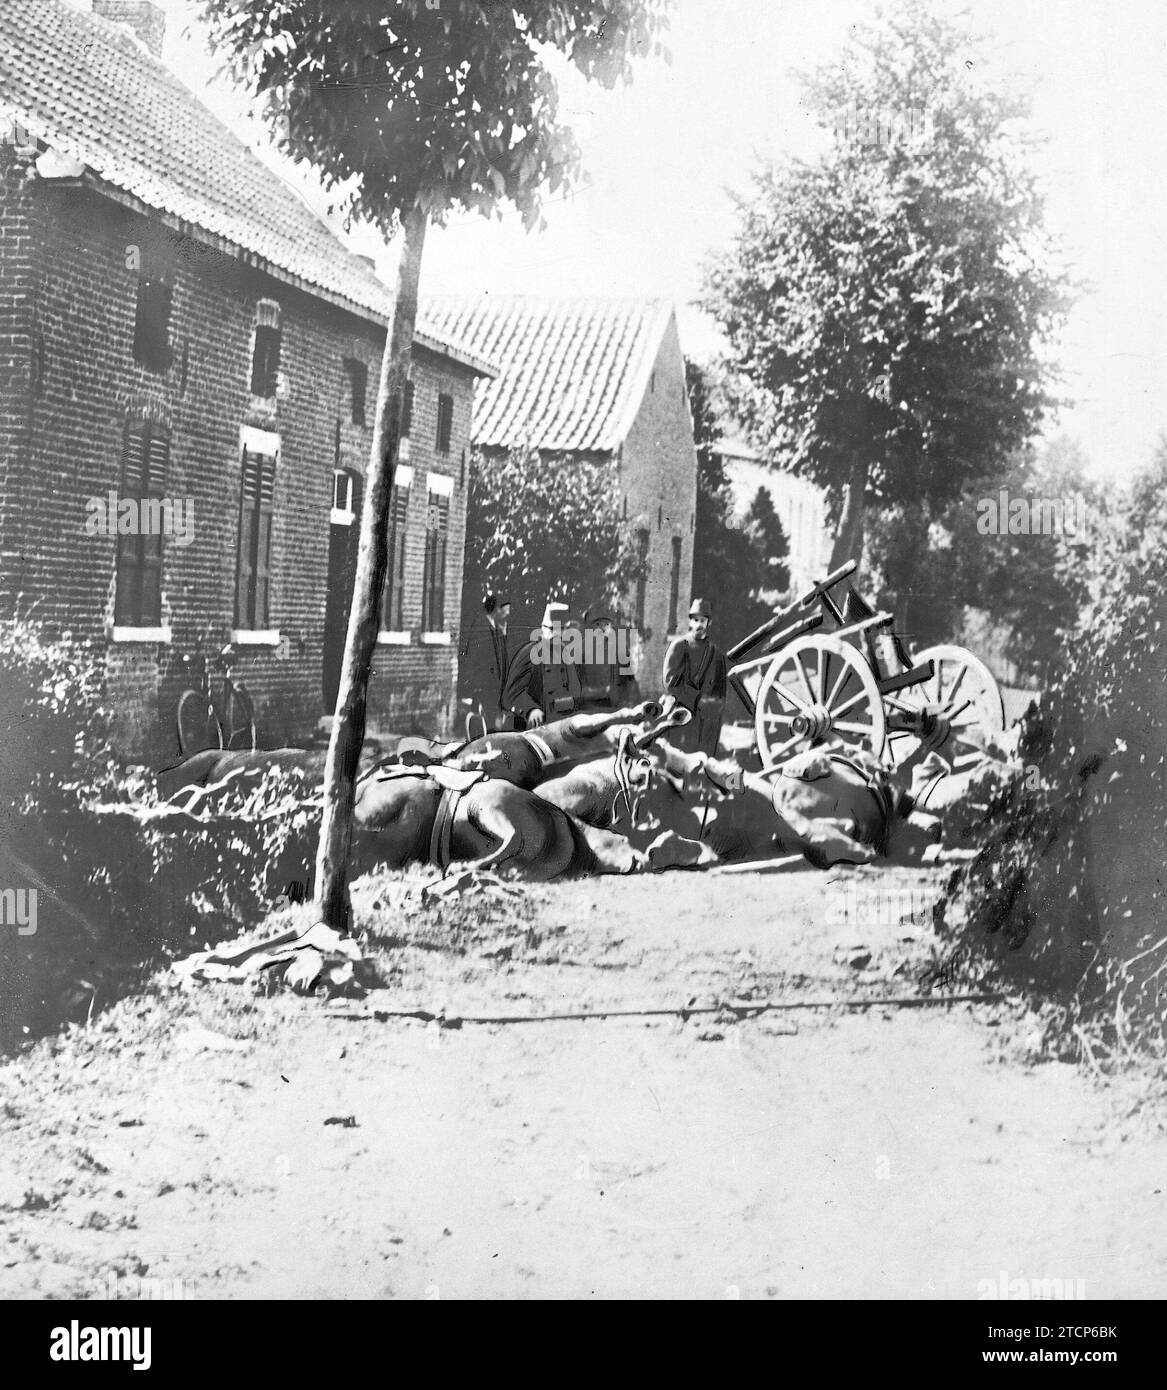 07/31/1914. In the vicinity of Liège. Horse corpses on a street in a small town near Liege. Credit: Album / Archivo ABC / Meurisse Stock Photo